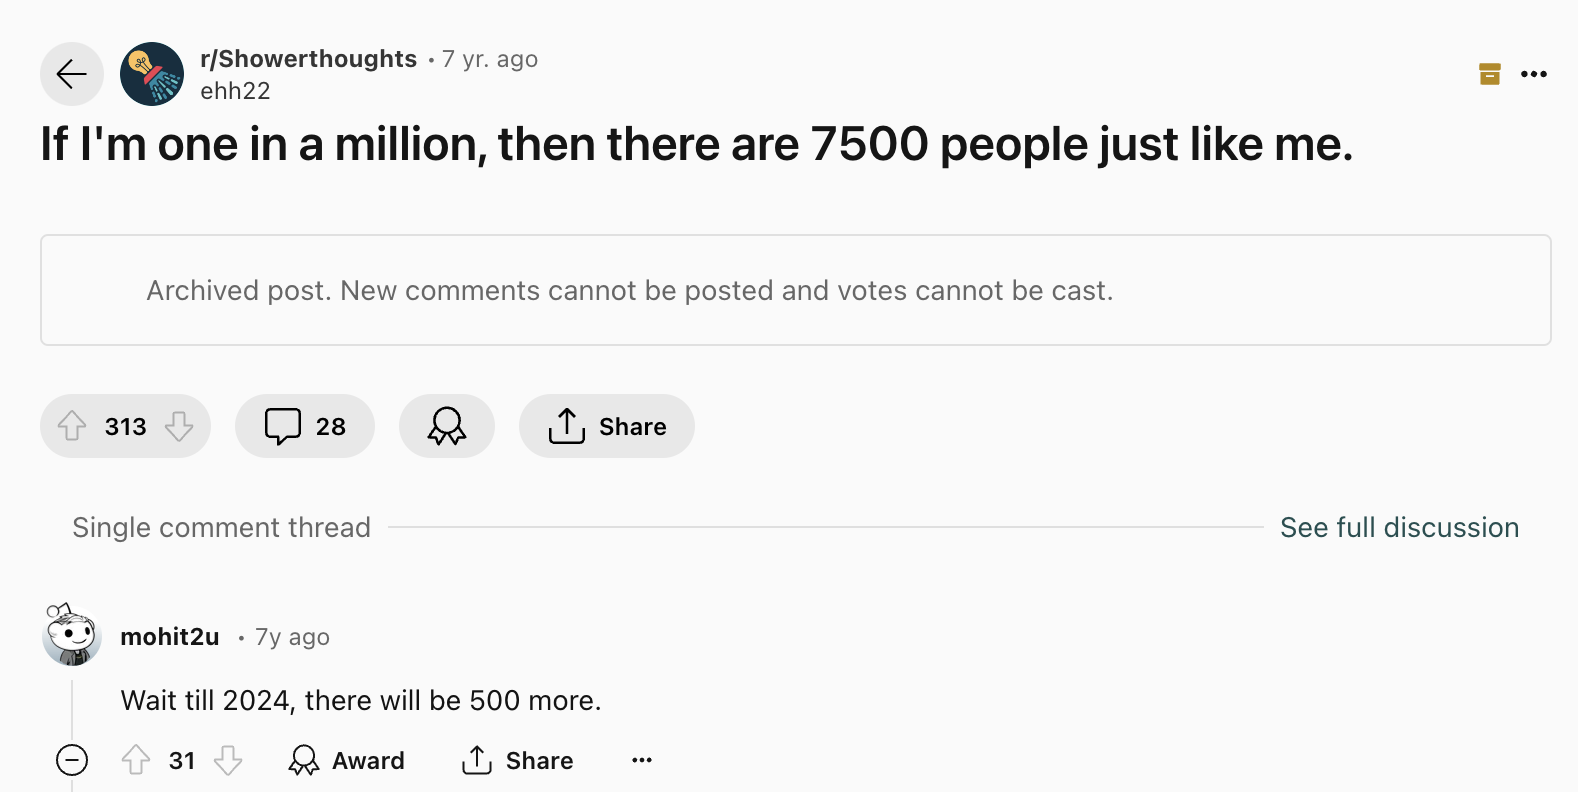 screenshot - rShowerthoughts 7 yr. ago ehh22 If I'm one in a million, then there are 7500 people just me. Archived post. New cannot be posted and votes cannot be cast. 313 28 Single comment thread mohit2u 7y ago Wait till 2024, there will be 500 more. 31 